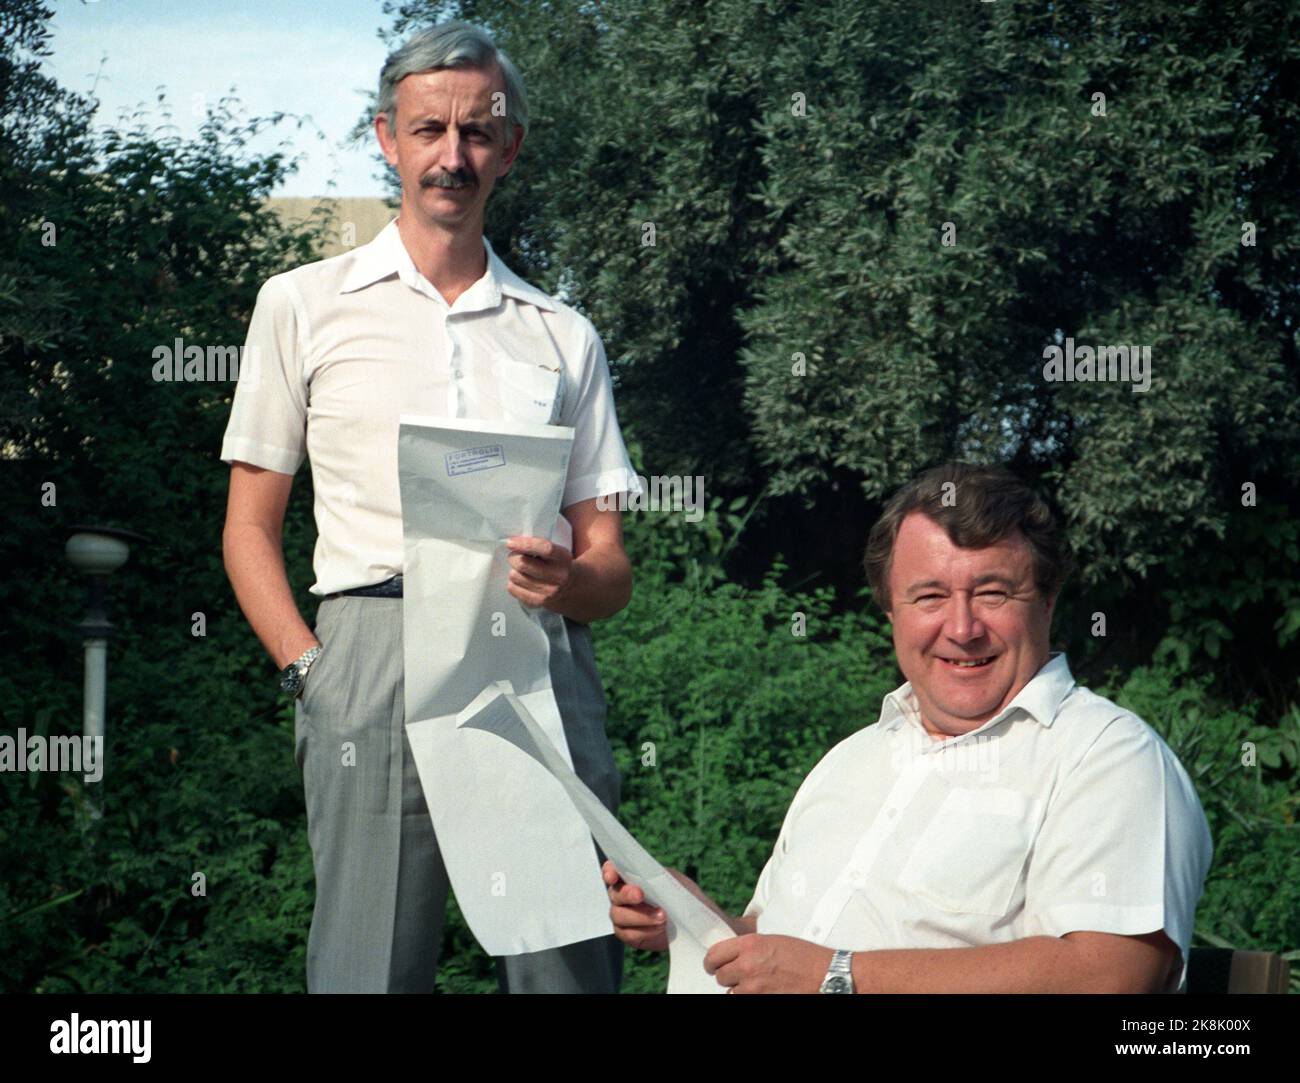 Baghdad, Iraq 19901102. Norway's ambassador to Kuwait, Hans Wilhelm Longva (t.h.) and Charge d'Affaires Peter Ræder in Iraq reads telex news from Norway in the garden outside the Norwegian ambassador's residence. After Iraq's invasion in Kuwait on August 2, Iraq ordered all embassies to close and be moved to Baghdad. Longva left Kuwait with an other staff, and was staying at the Norwegian embassy, where he is Iraqi hostage. NTB Stock Photo Ole Walberg / NTB Stock Photo